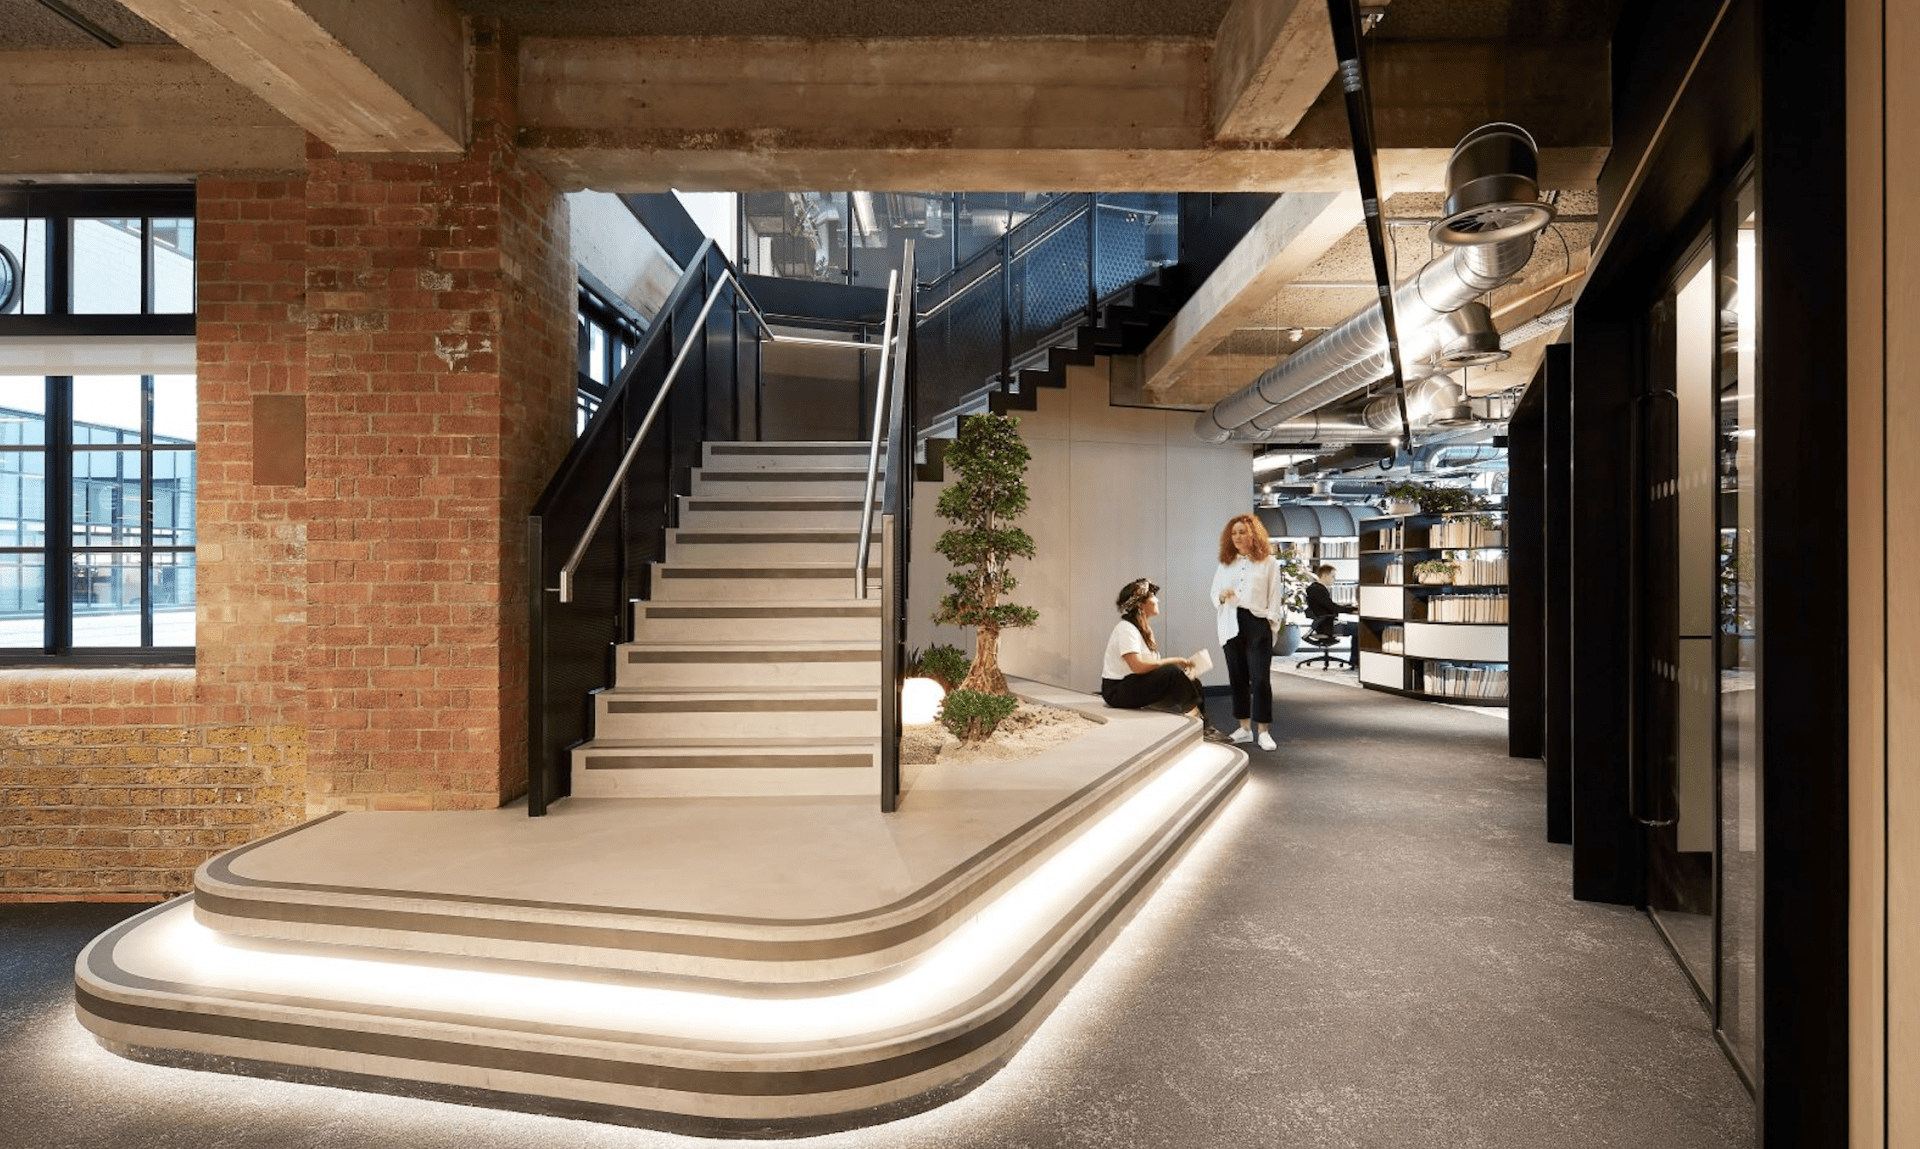 Open Society Foundations' new workspace focuses on a holistic approach to wellbeing